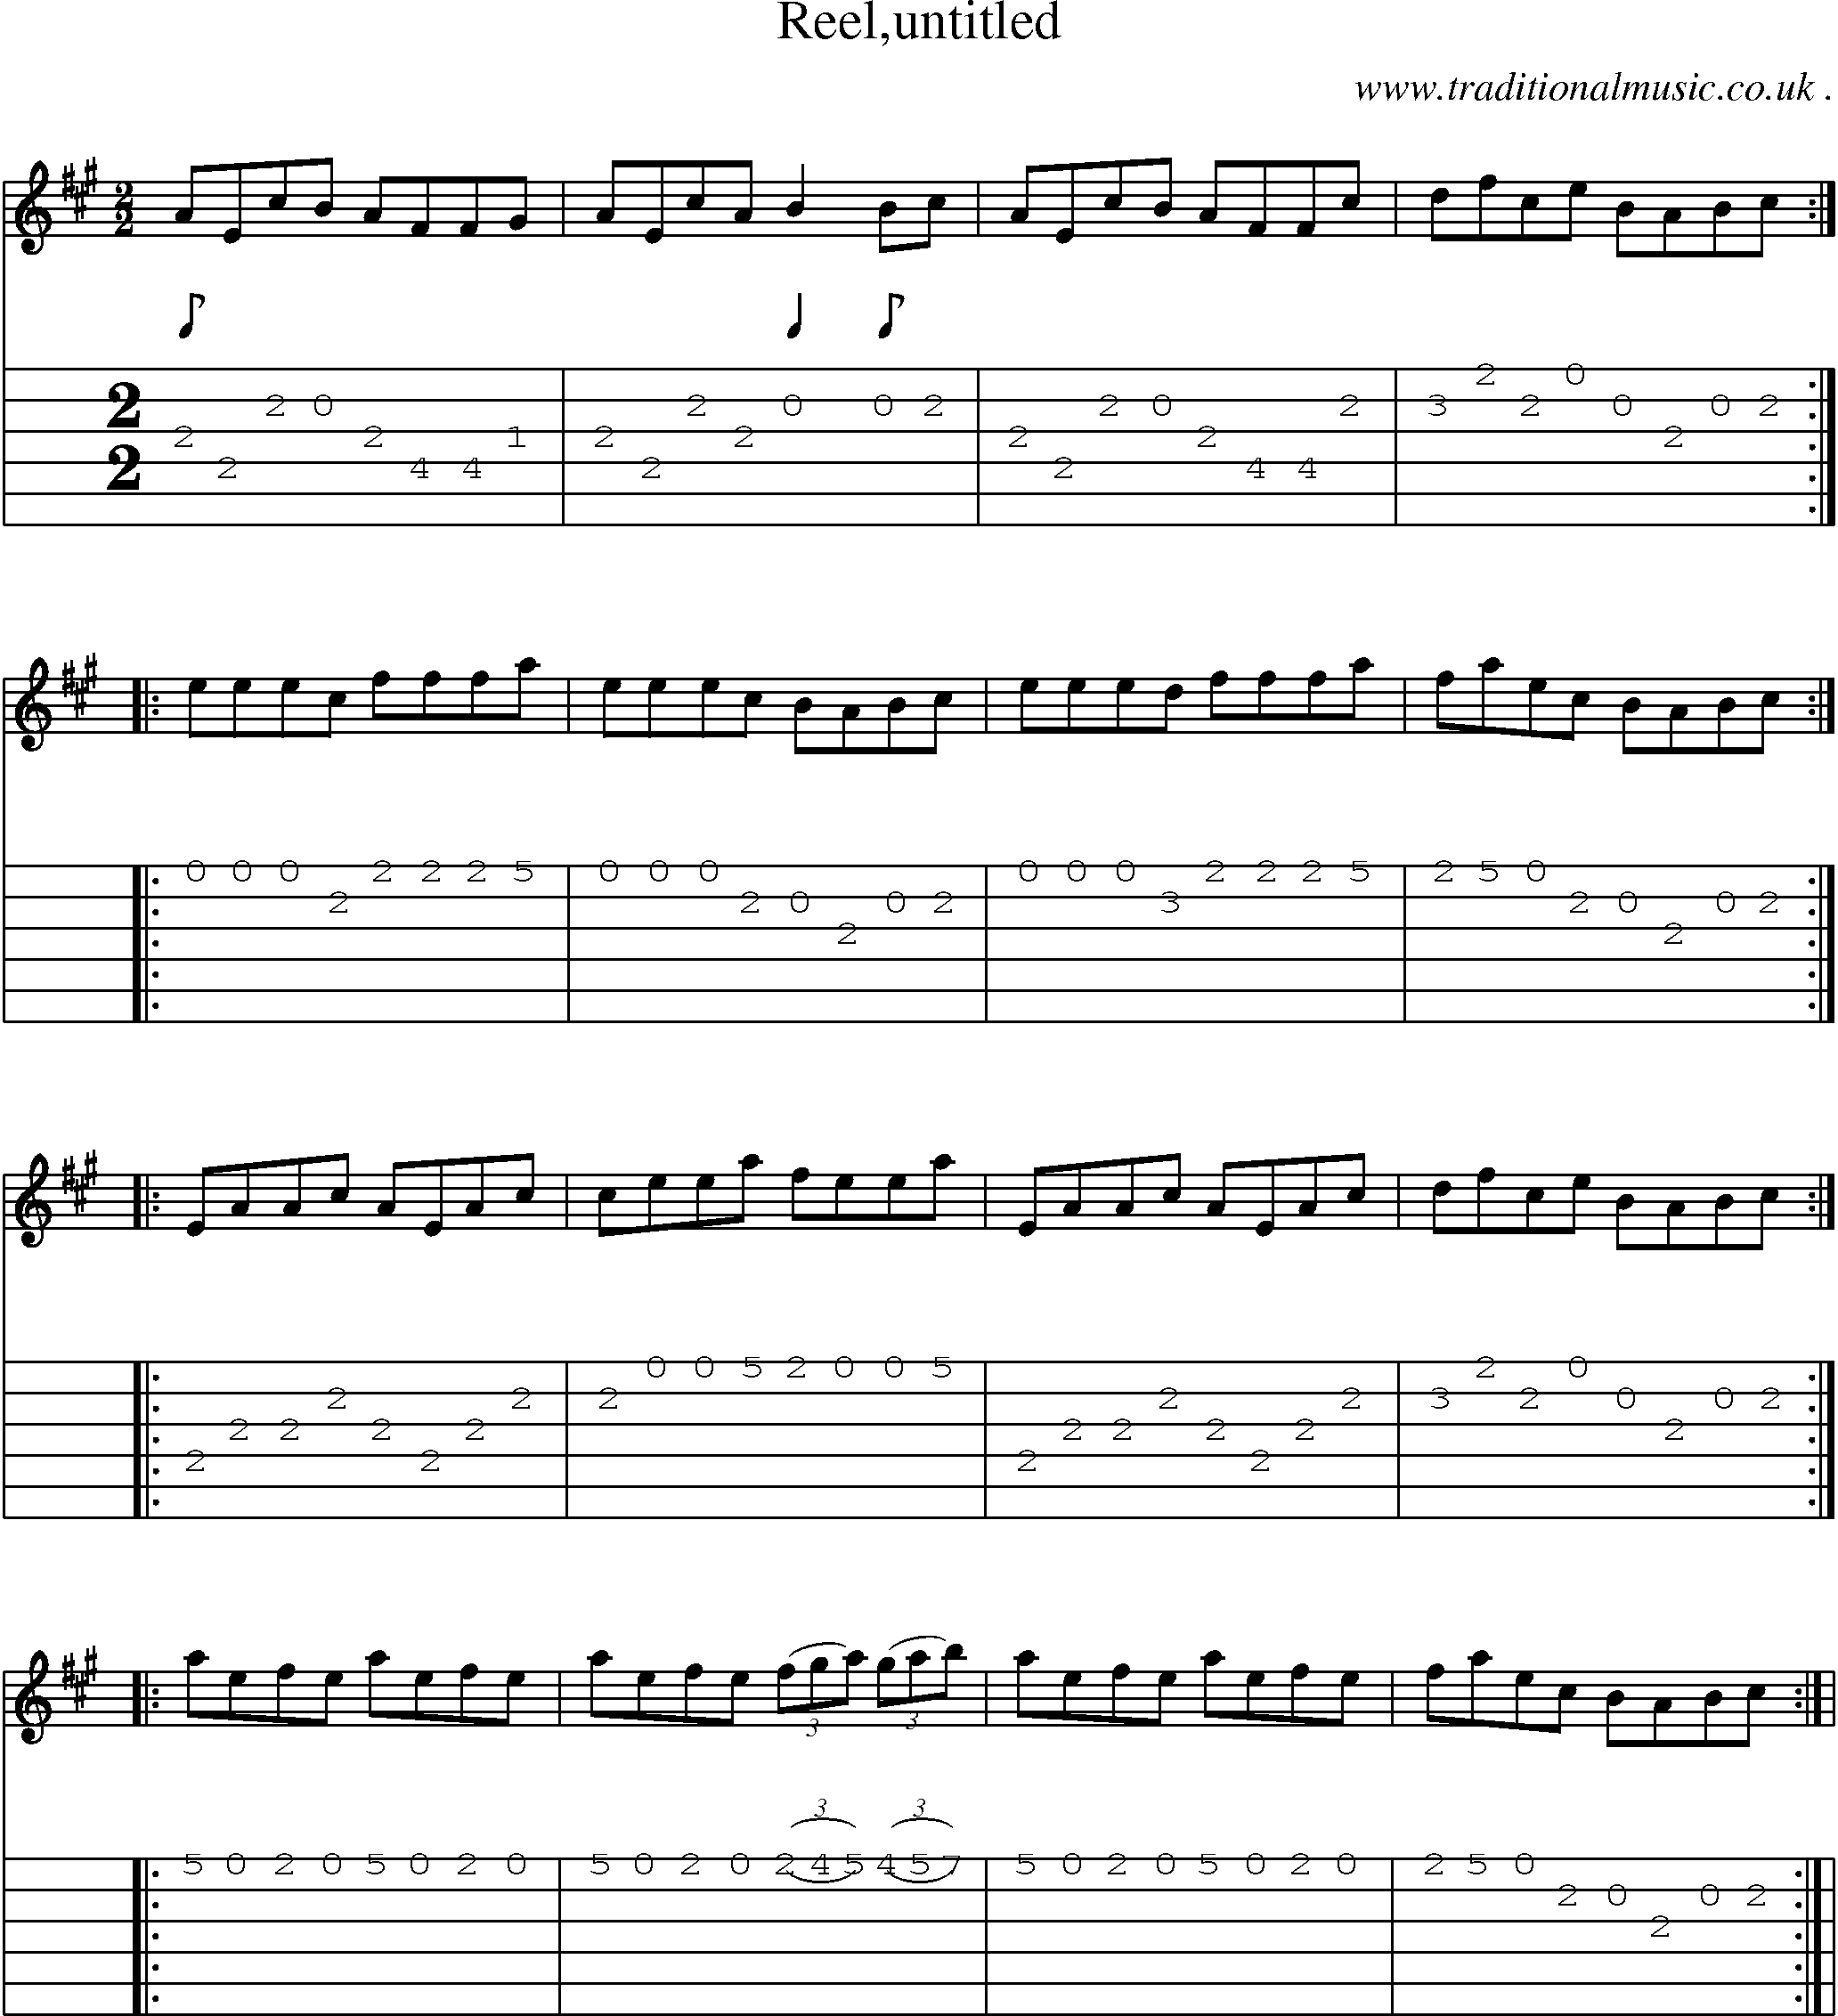 Sheet-Music and Guitar Tabs for Reeluntitled